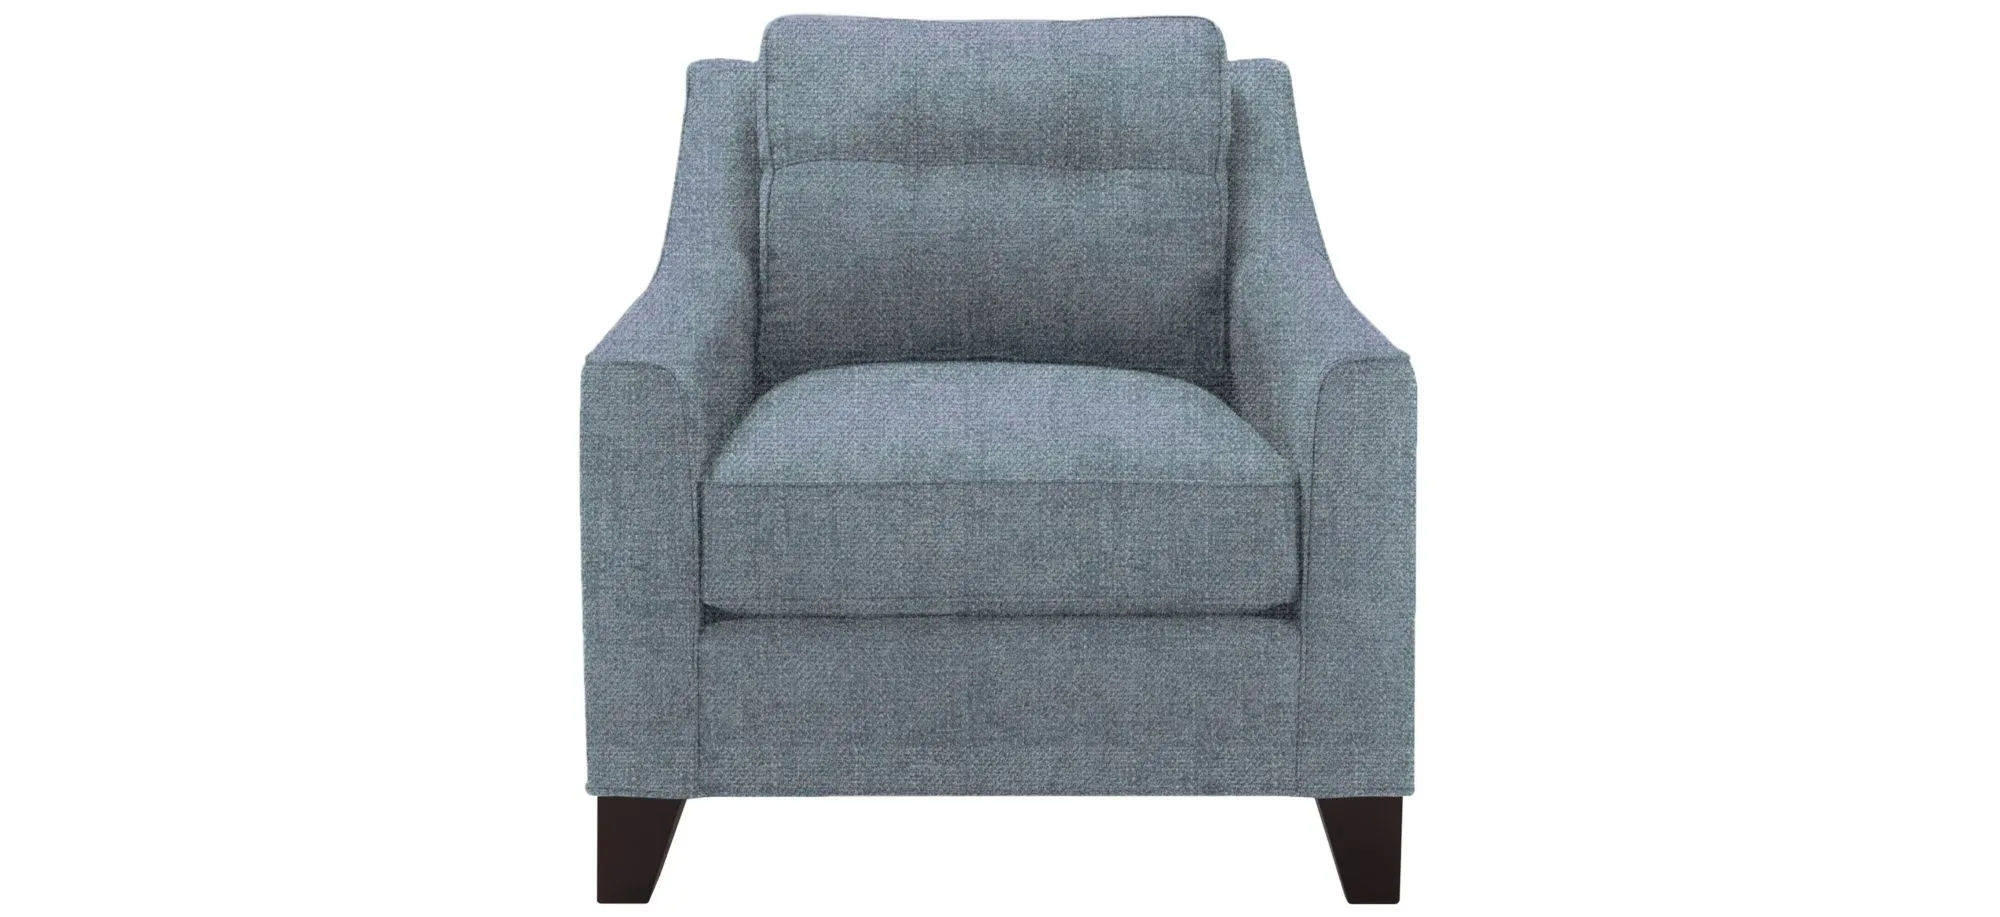 Carmine Chair in Elliot French Blue by H.M. Richards